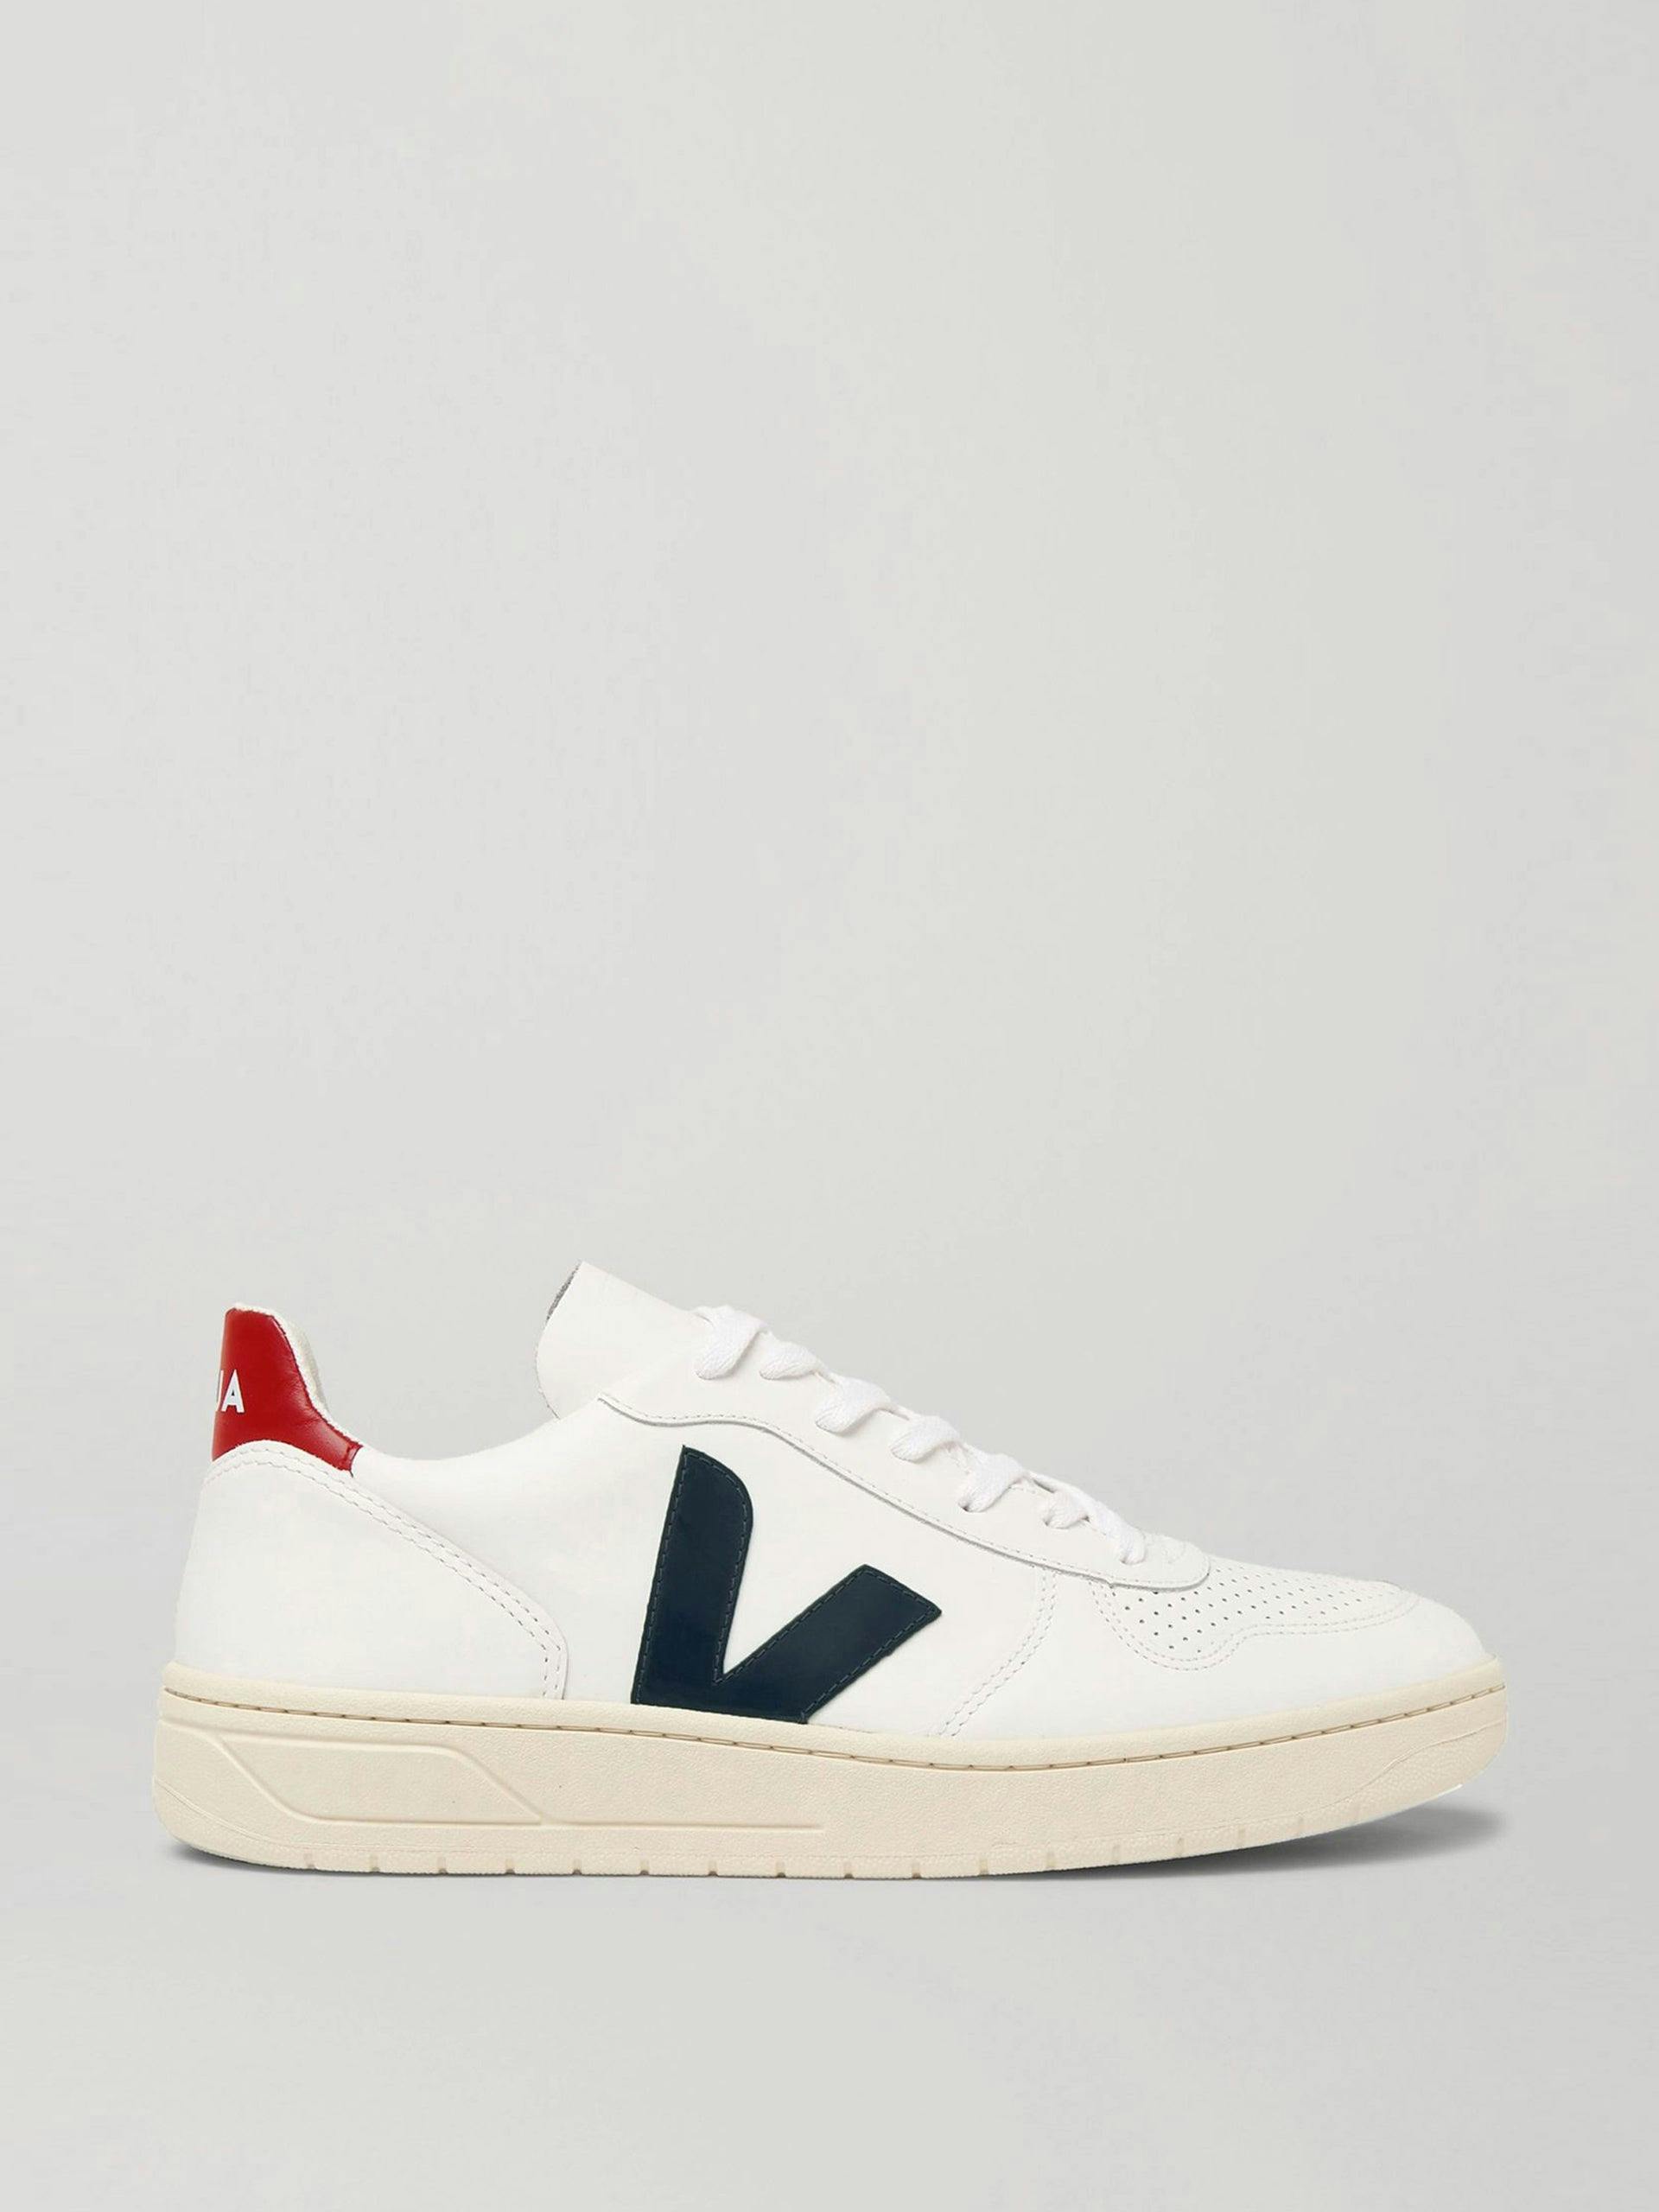 V-10 Rubber-trimmed leather sneakers